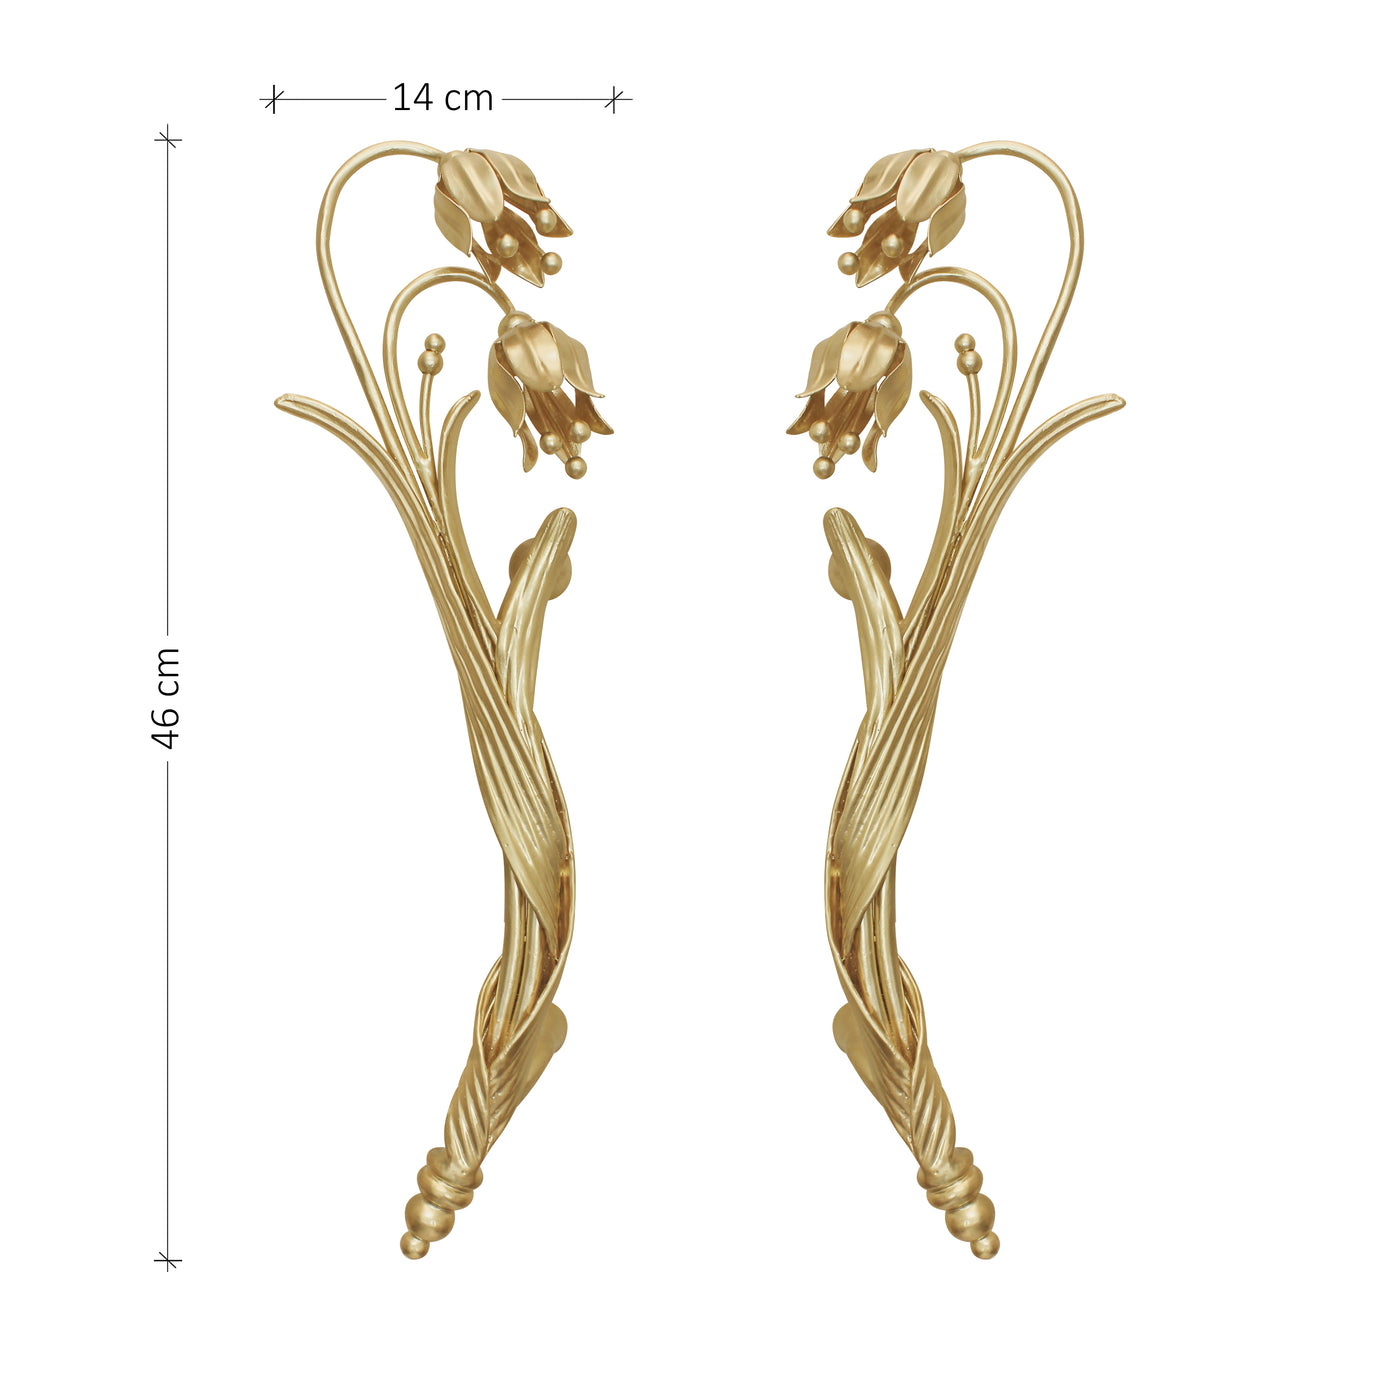 A pair of golden decorative pull handles inspired by the snowdrop flower with annotated dimensions